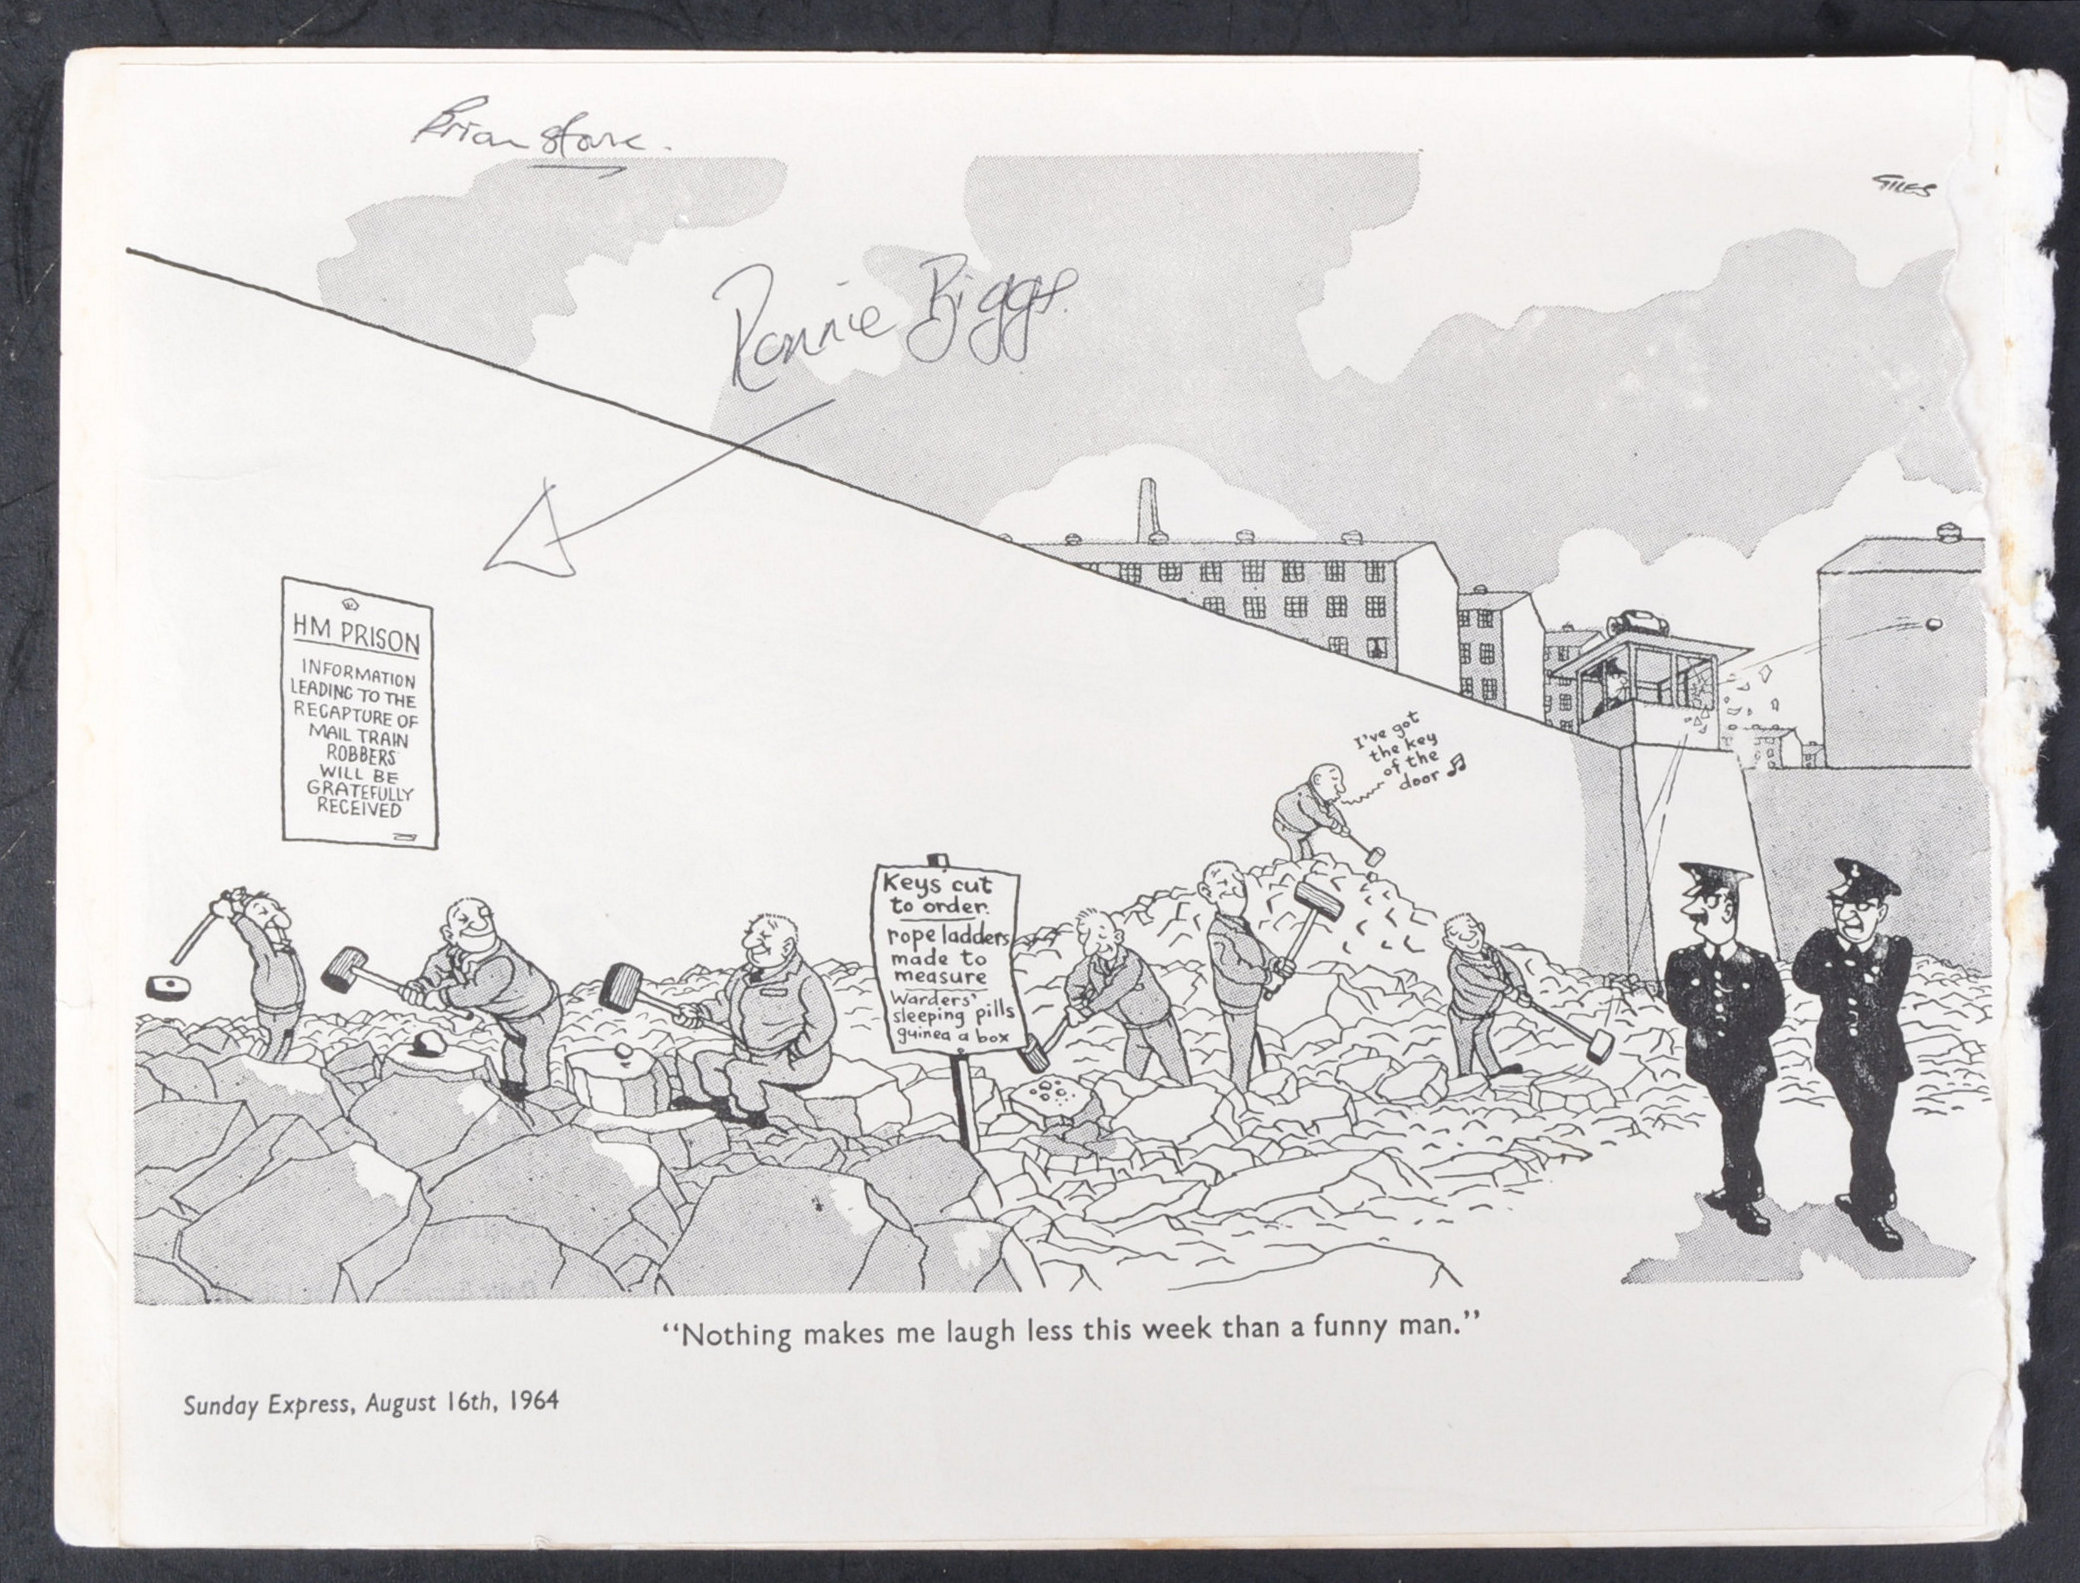 GREAT TRAIN ROBBERY - RONNIE BIGGS (1929-2013) - SIGNED GILES CARTOON